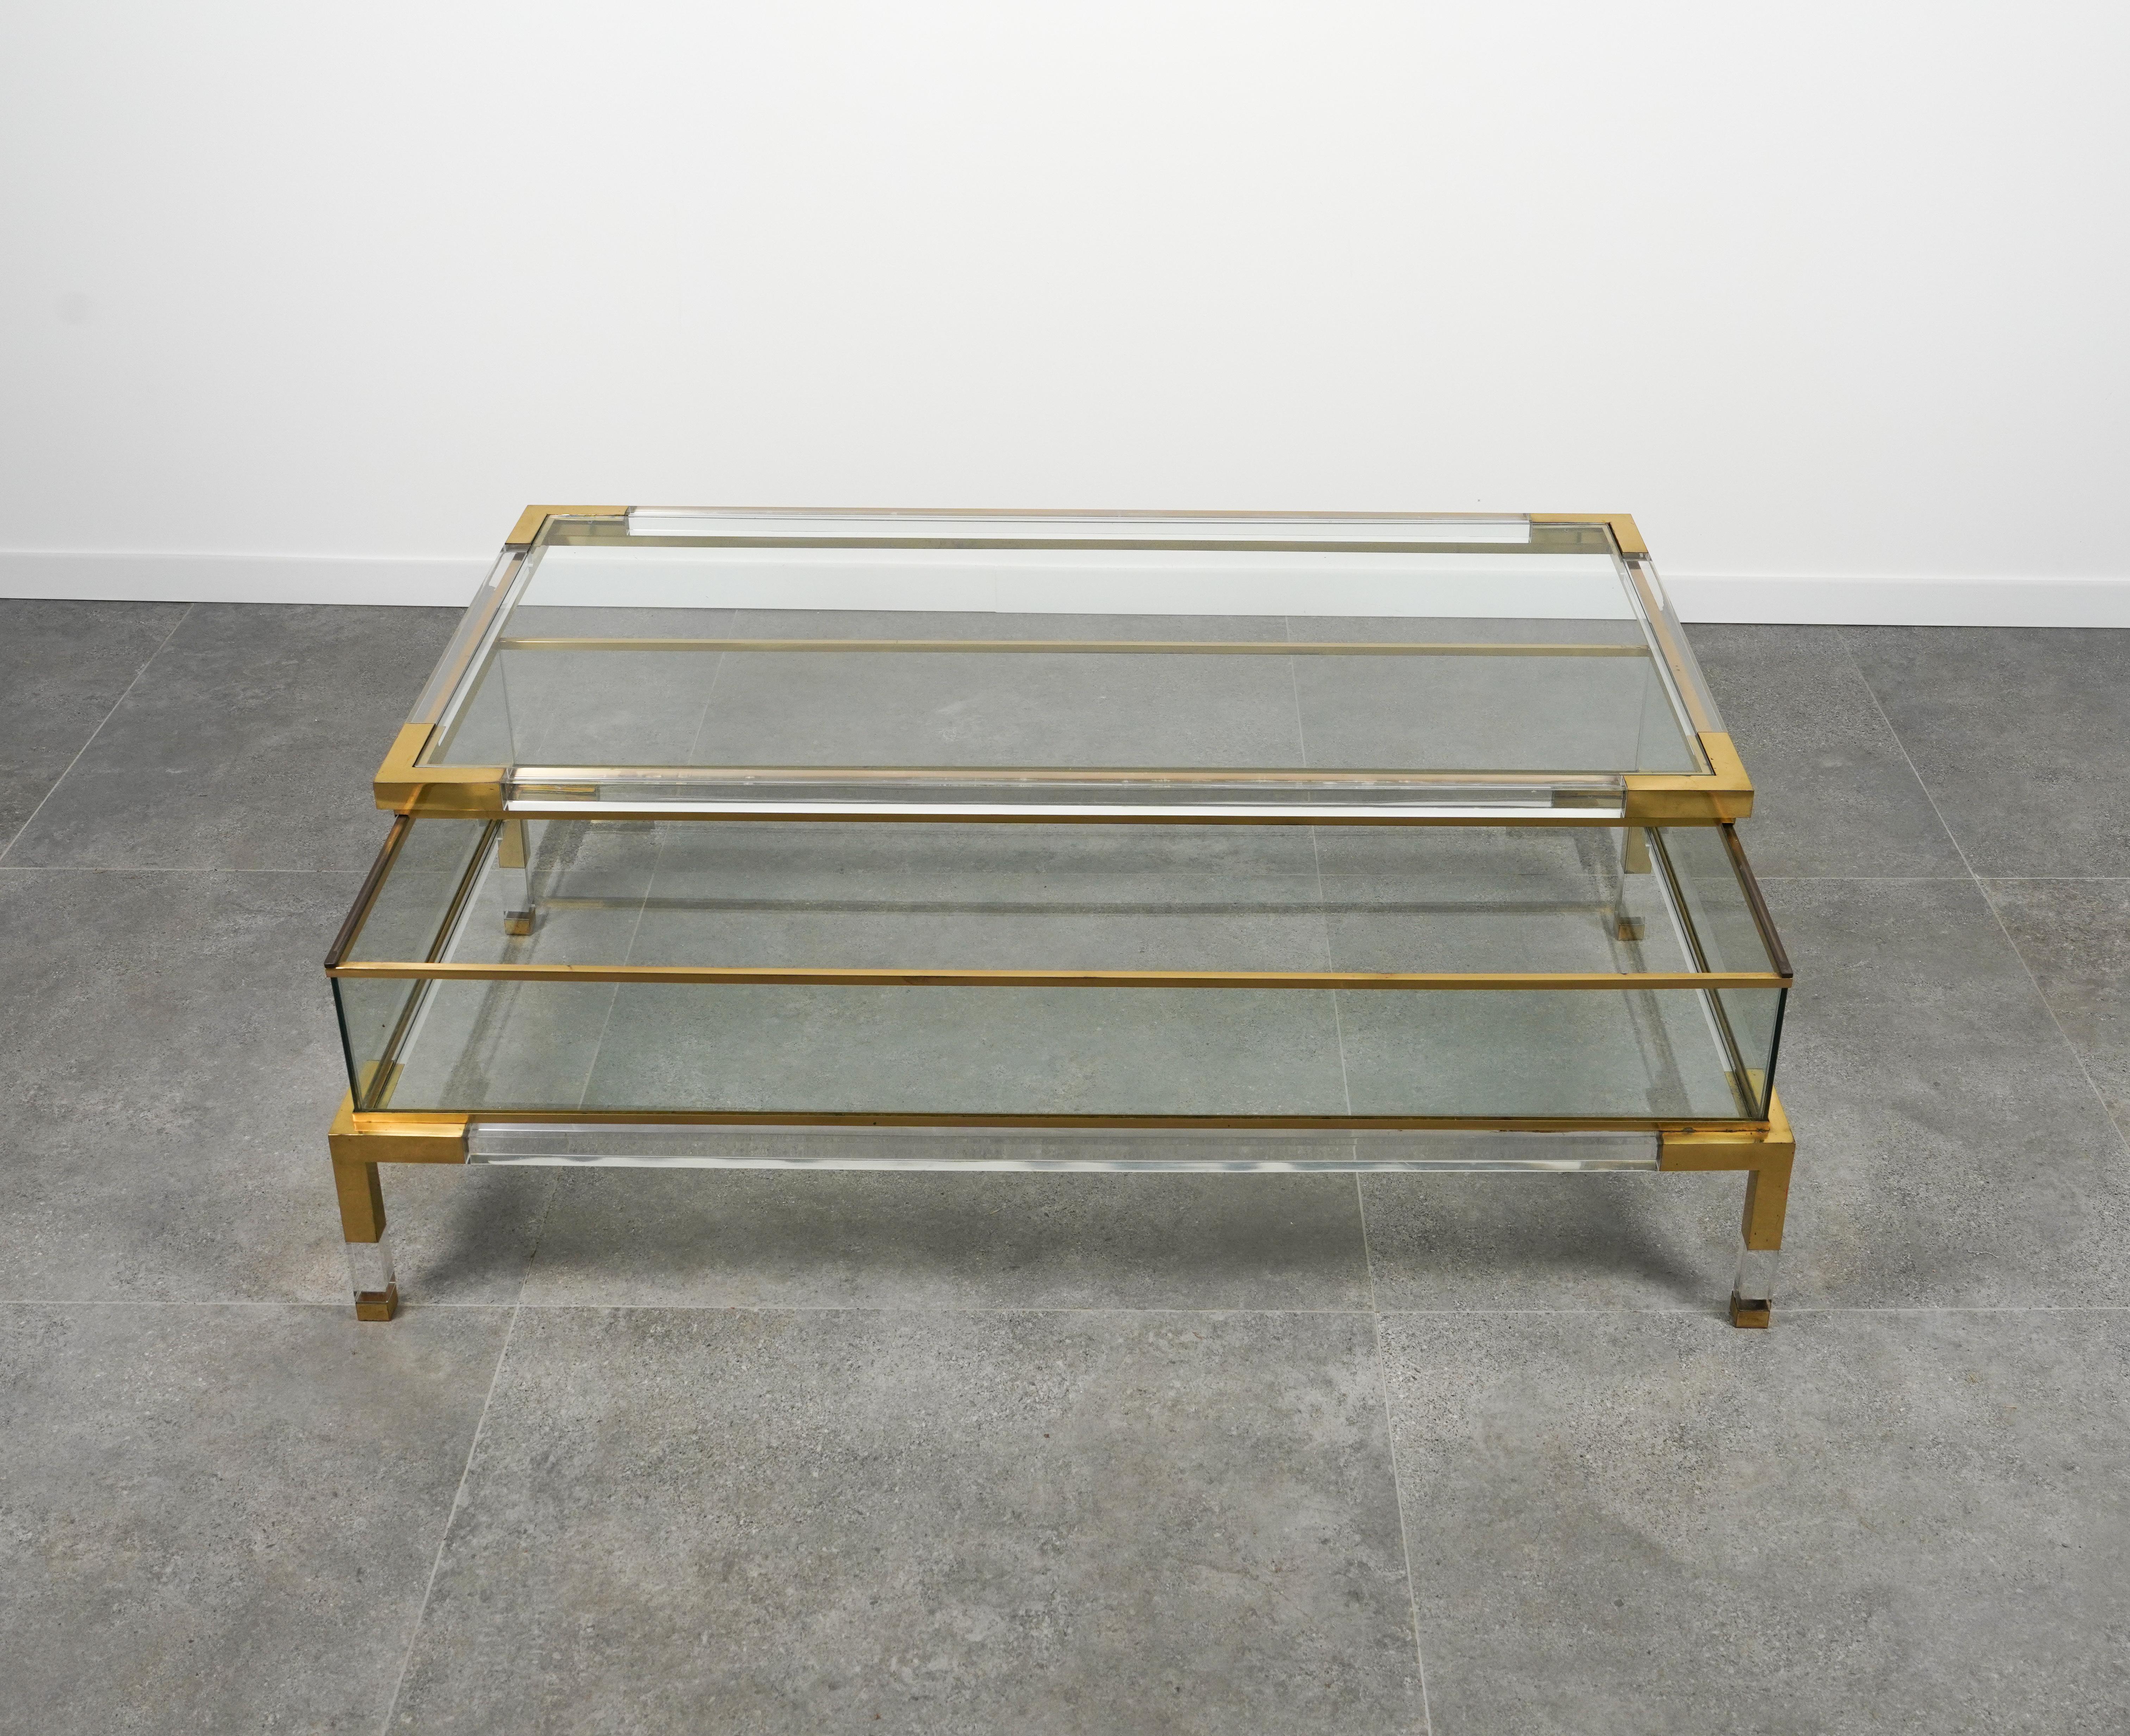 Midcentury Coffee Table in Lucite, Brass & Glass by Maison Jansen, France 1970s For Sale 1